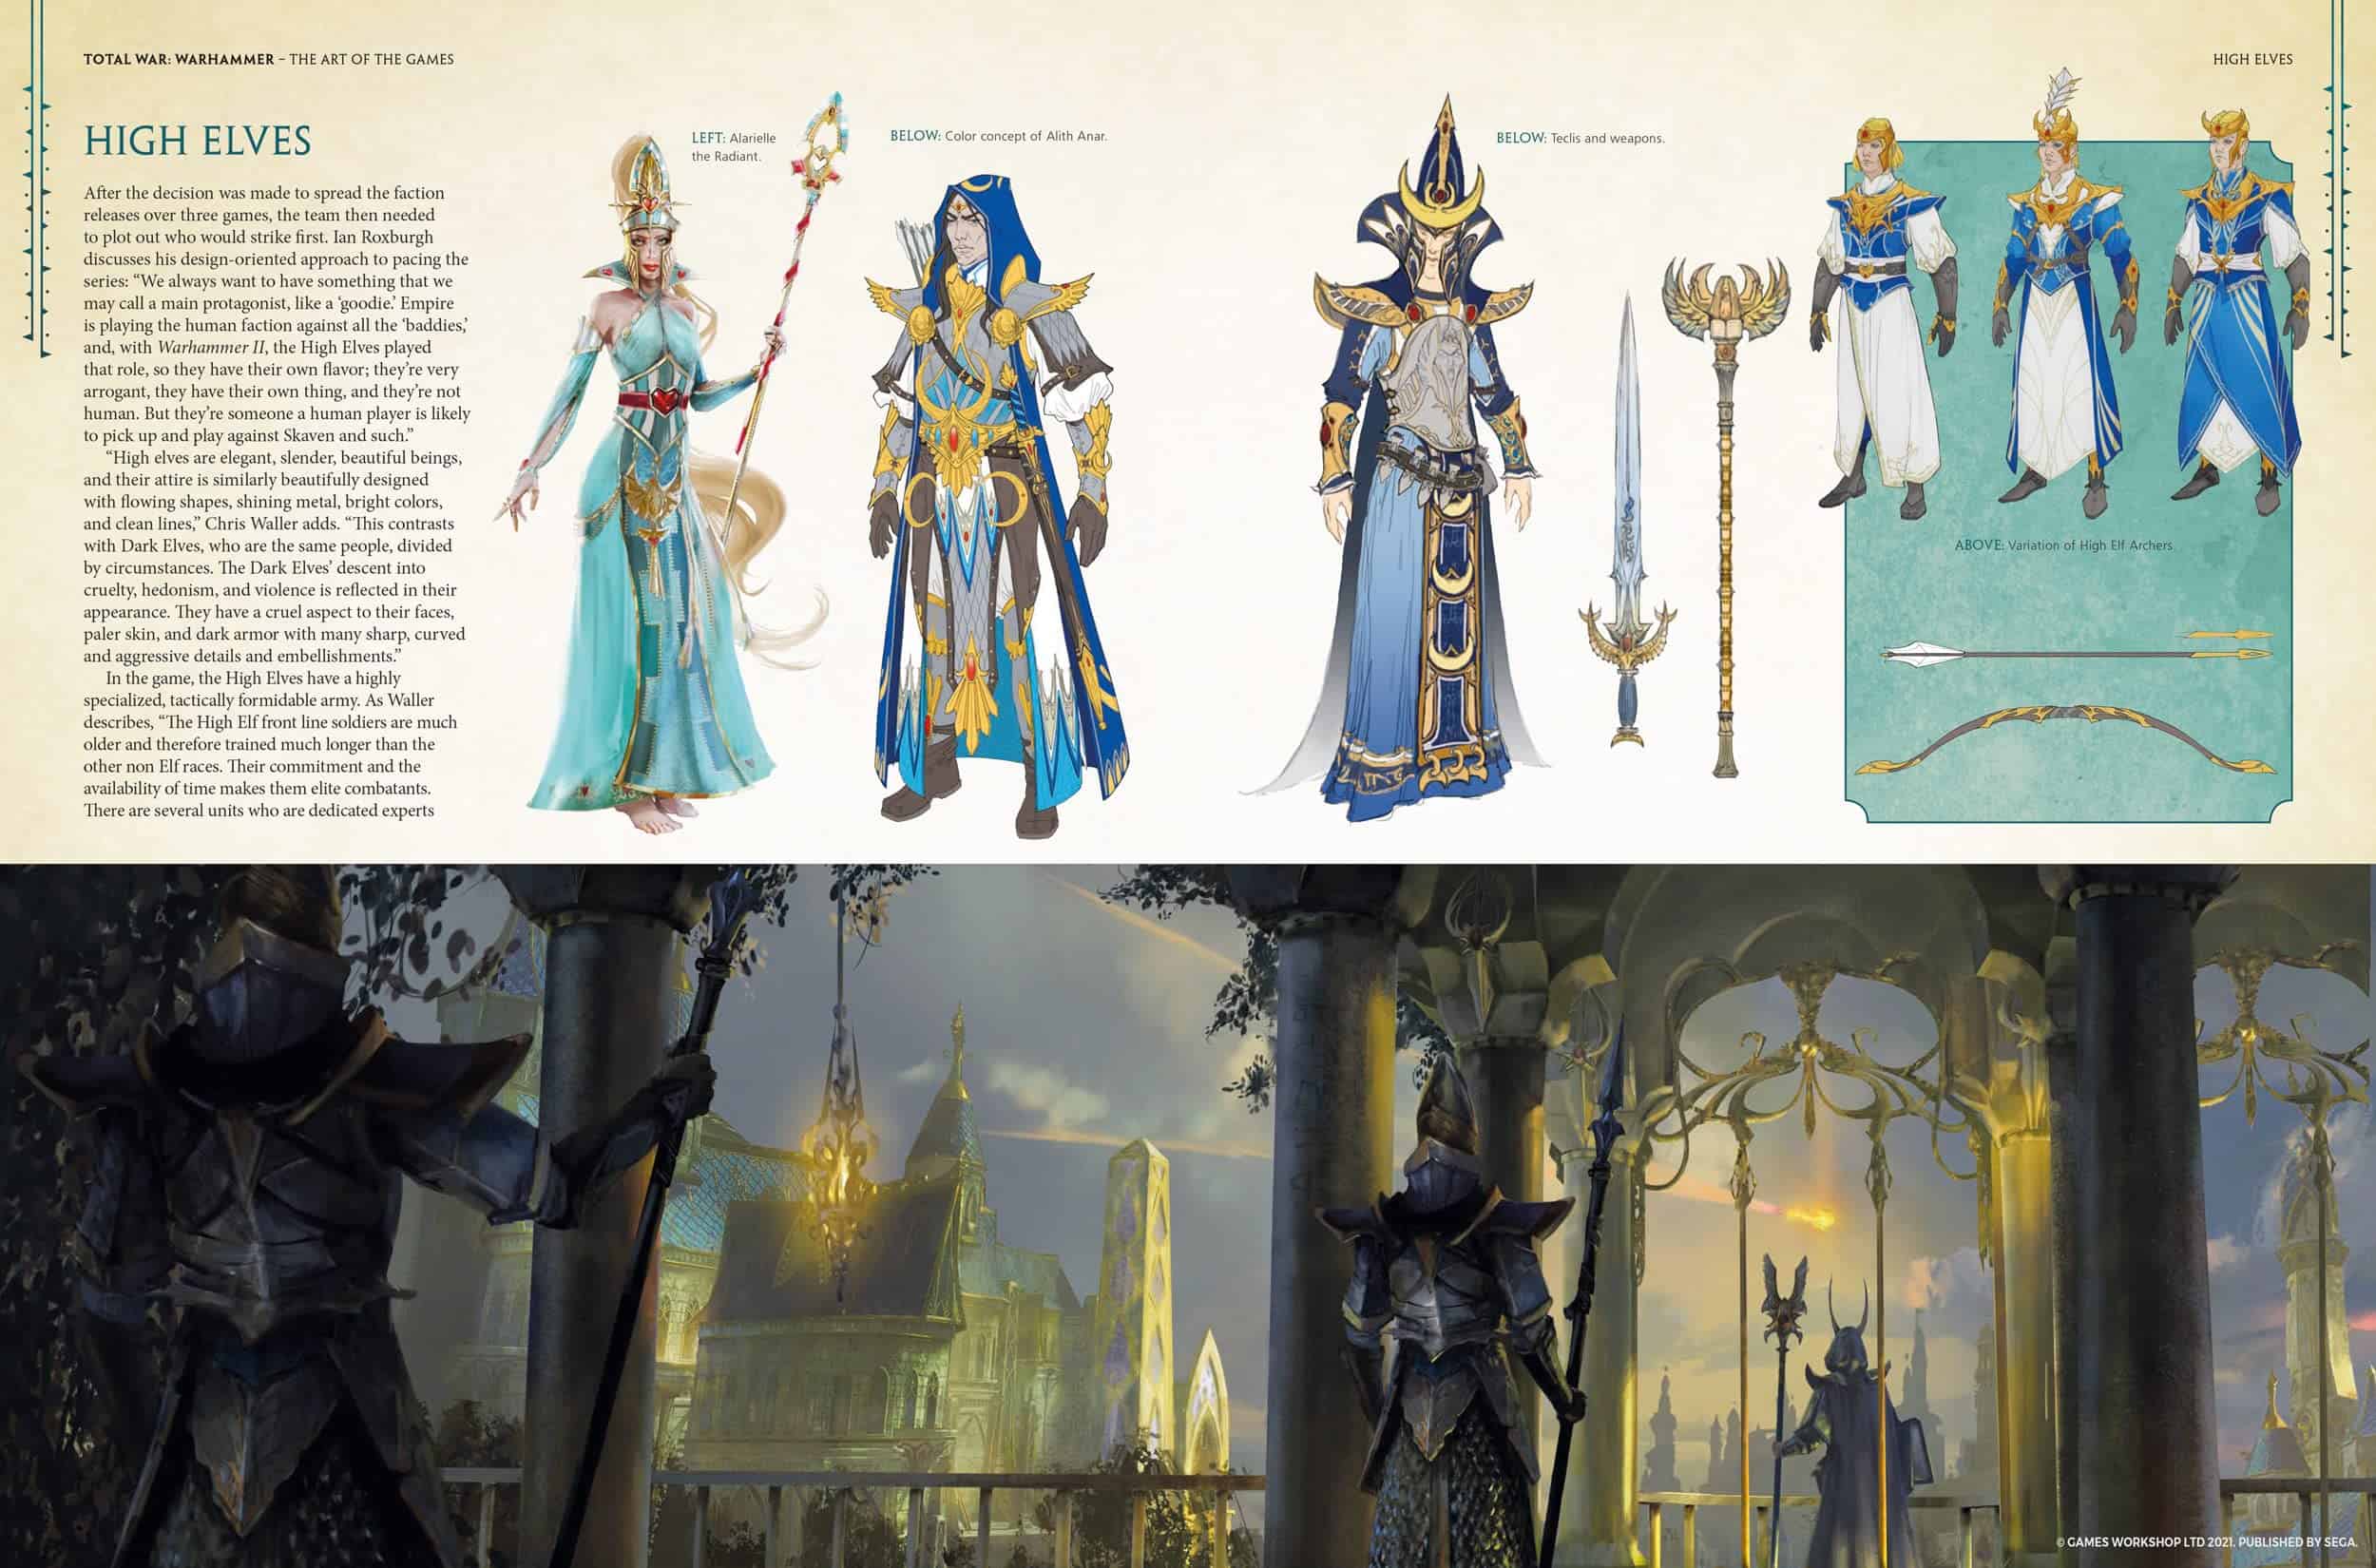 New Total War Warhammer The Art of the Games Book!